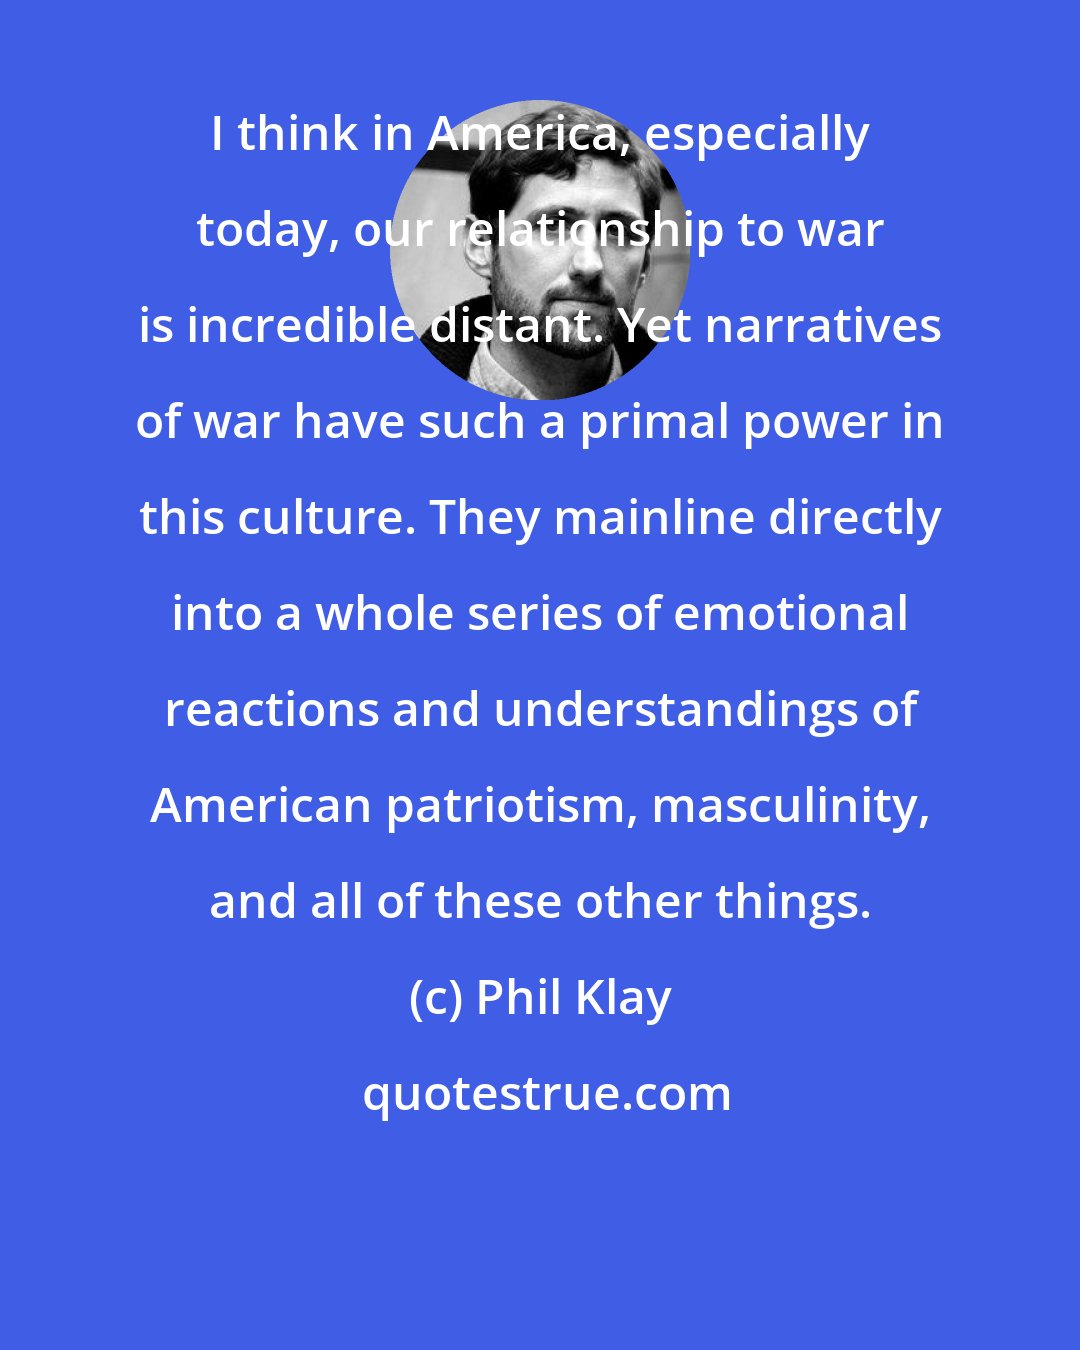 Phil Klay: I think in America, especially today, our relationship to war is incredible distant. Yet narratives of war have such a primal power in this culture. They mainline directly into a whole series of emotional reactions and understandings of American patriotism, masculinity, and all of these other things.